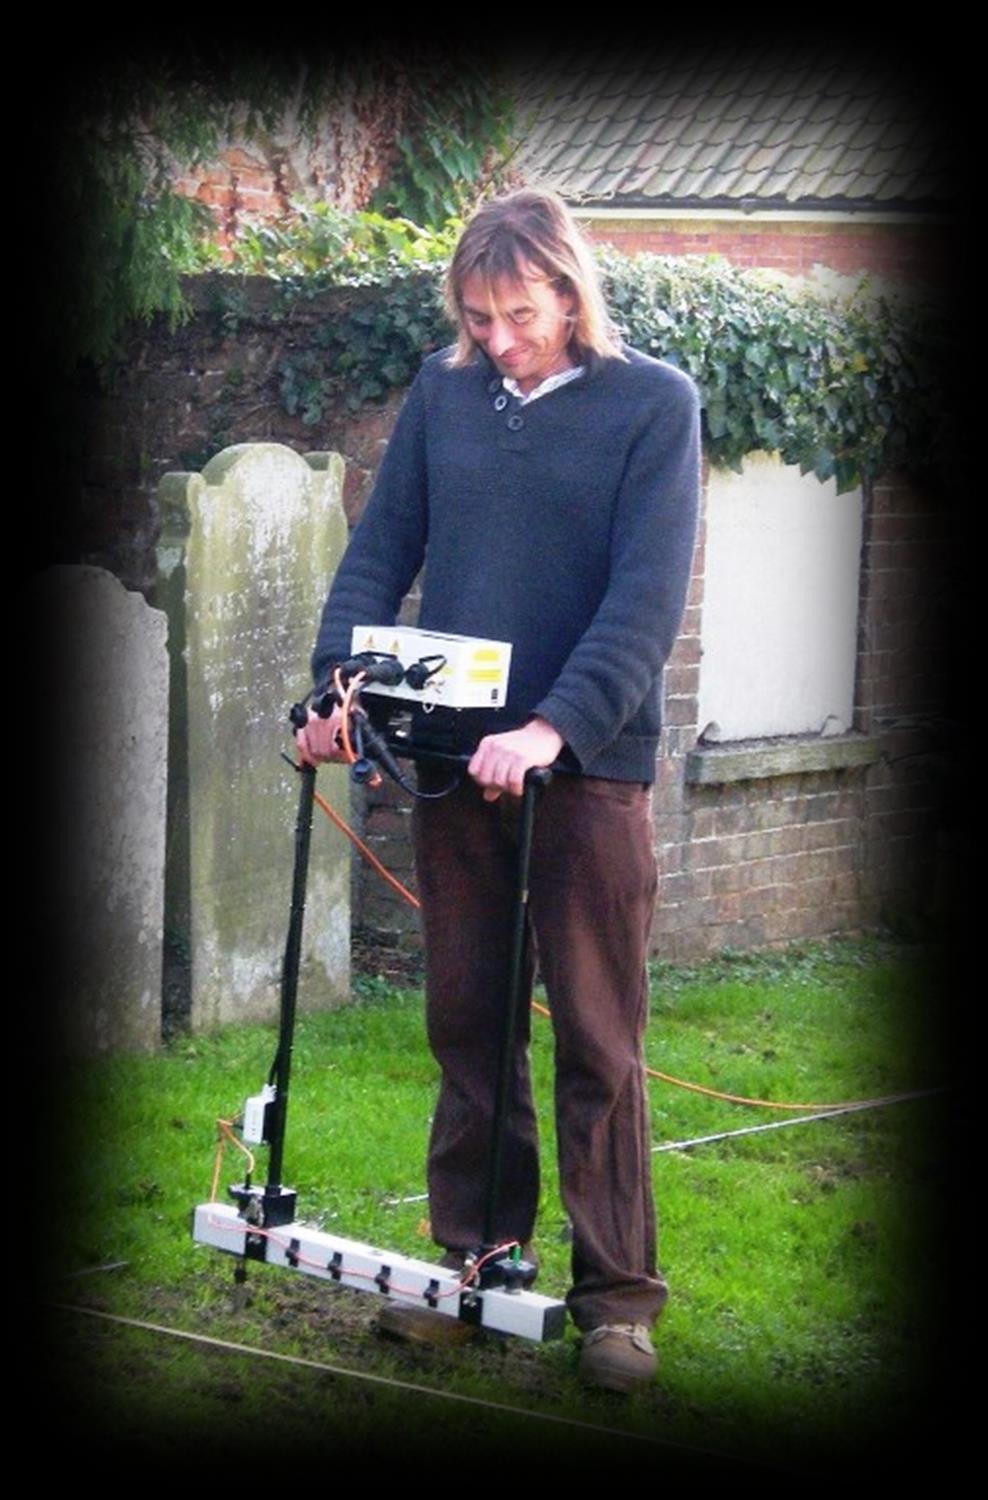 Geophysics In October 2015, Dr David Bescoby undertook a geophysical survey of the